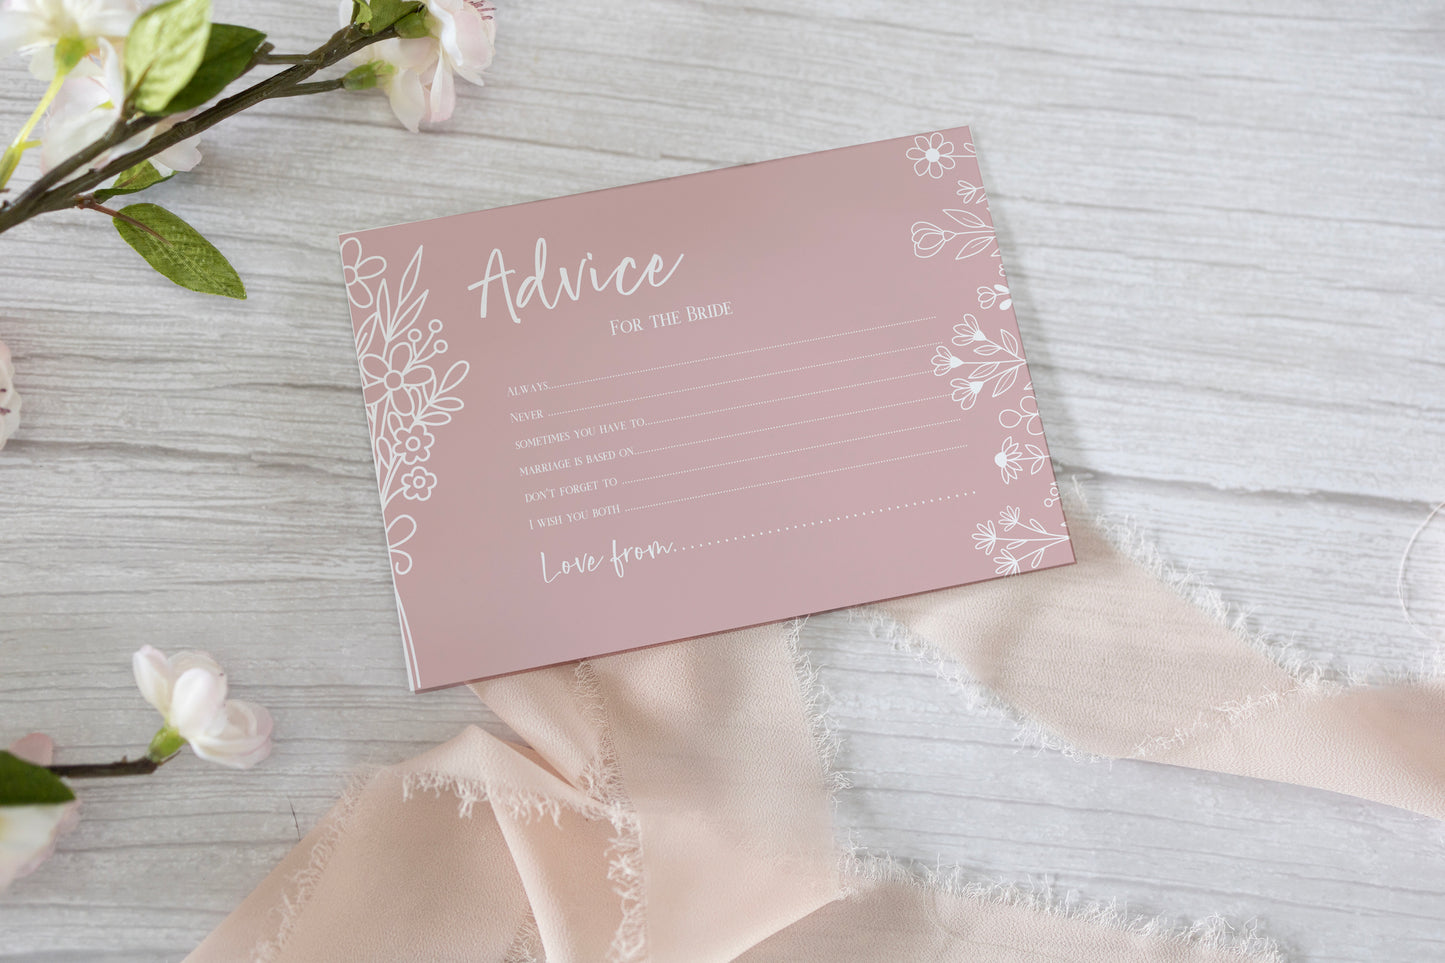 Hen Party Games Advice To The Bride Cards Hen Party Accessories Keepsake Gift Hen Party Games Hen Party Gift Bride To Be blush cards